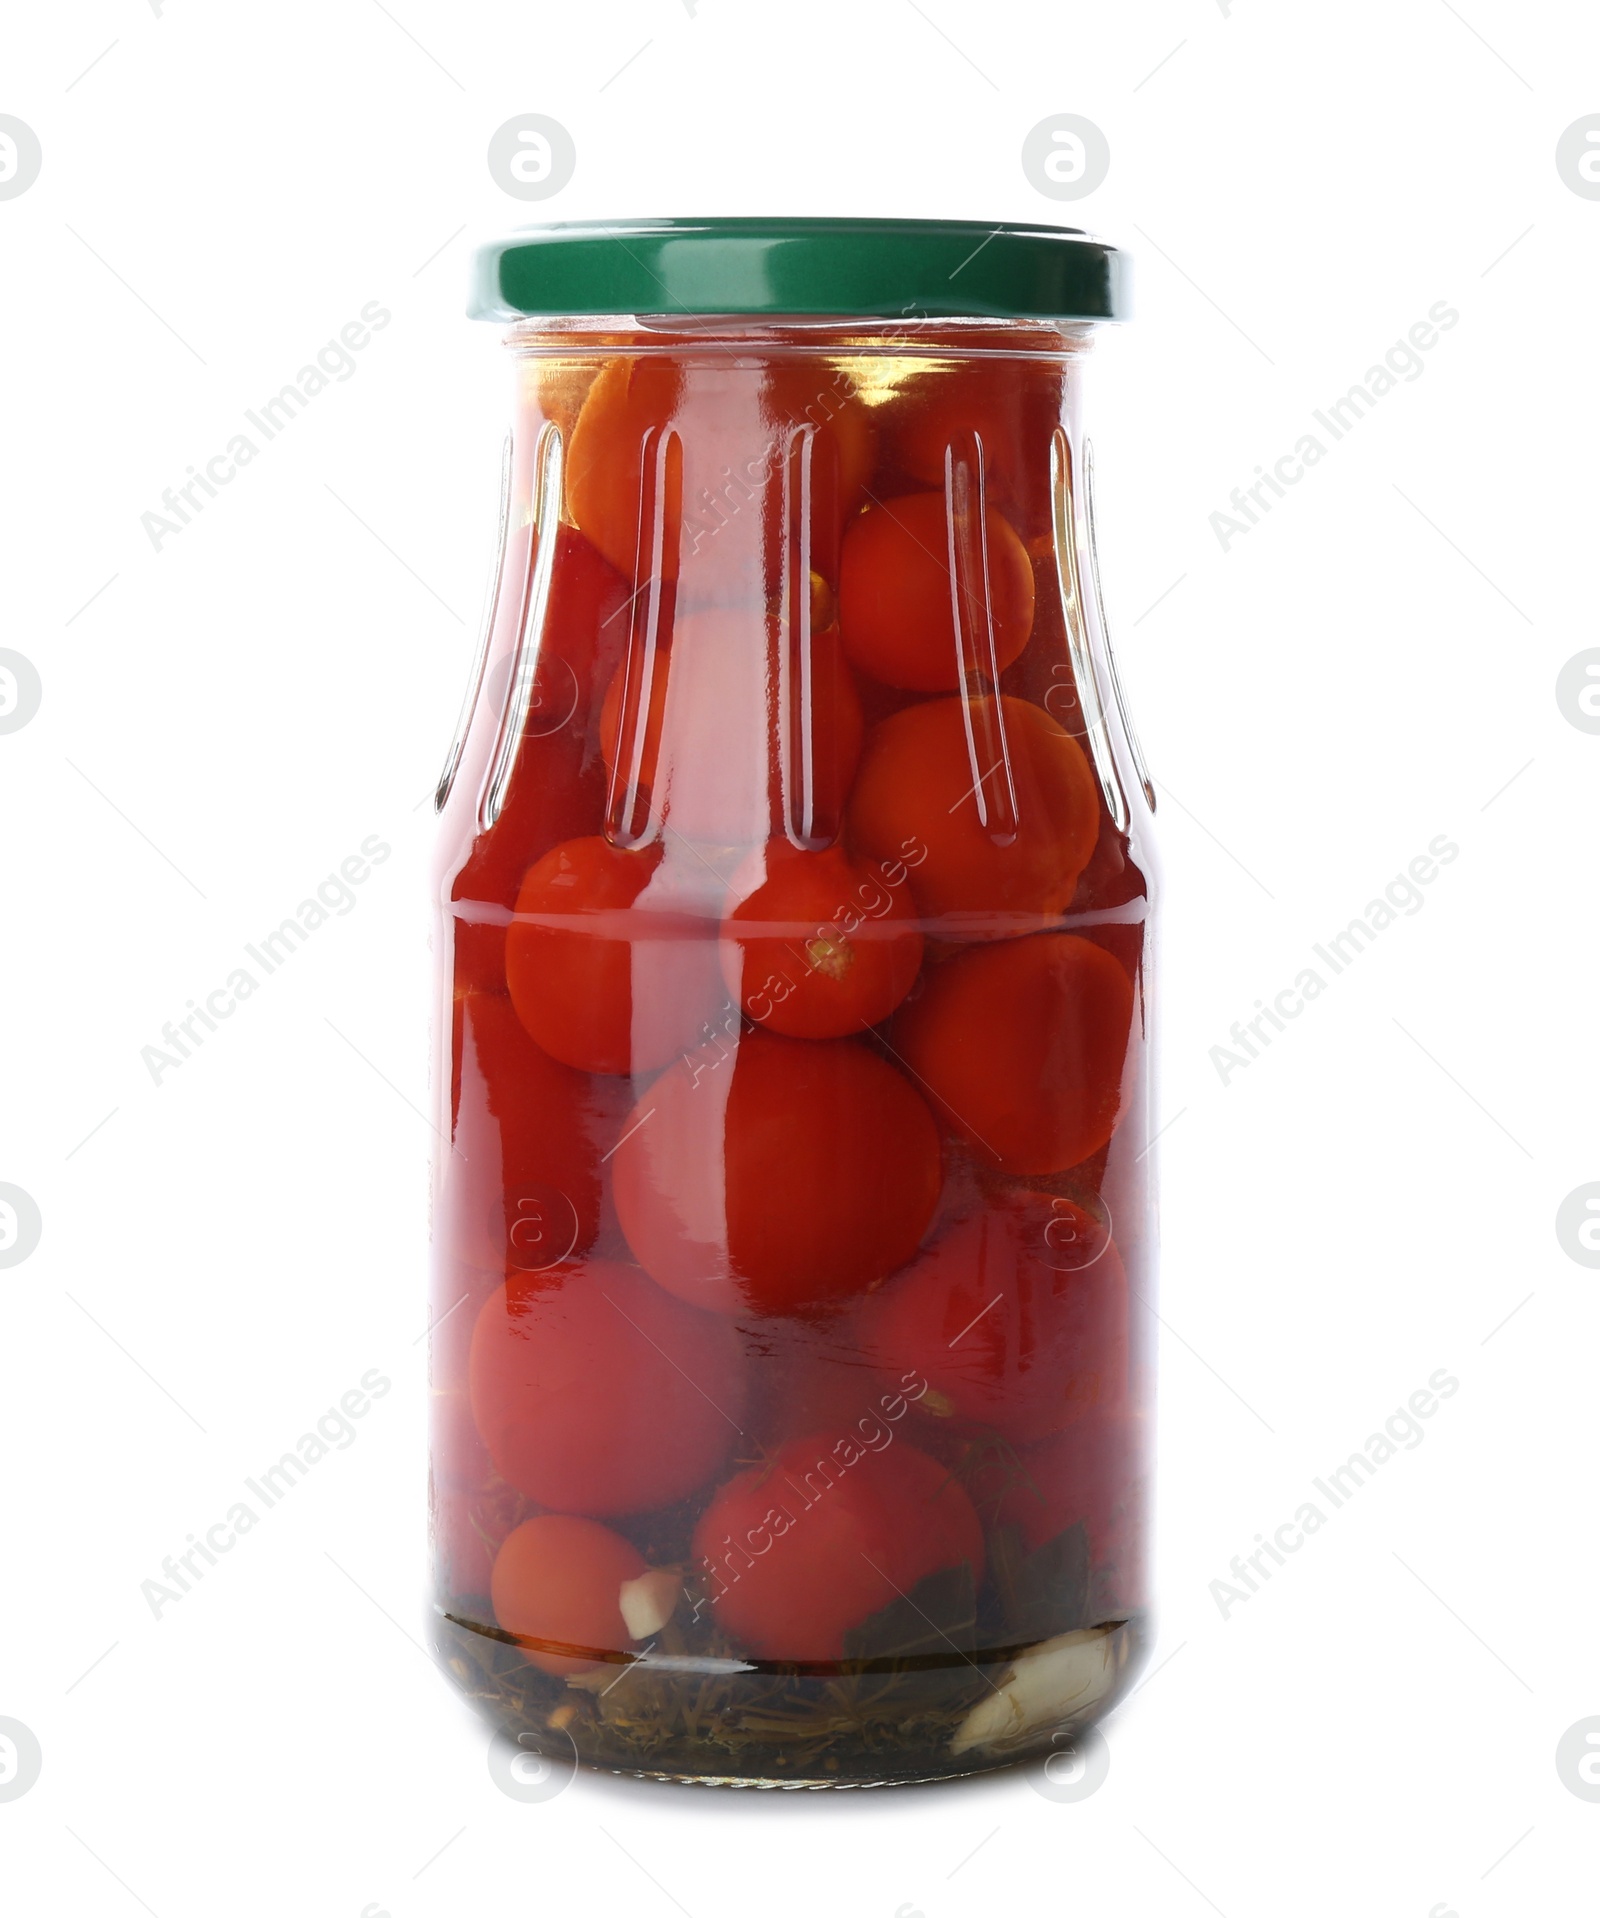 Photo of Pickled cherry tomatoes in glass jar isolated on white